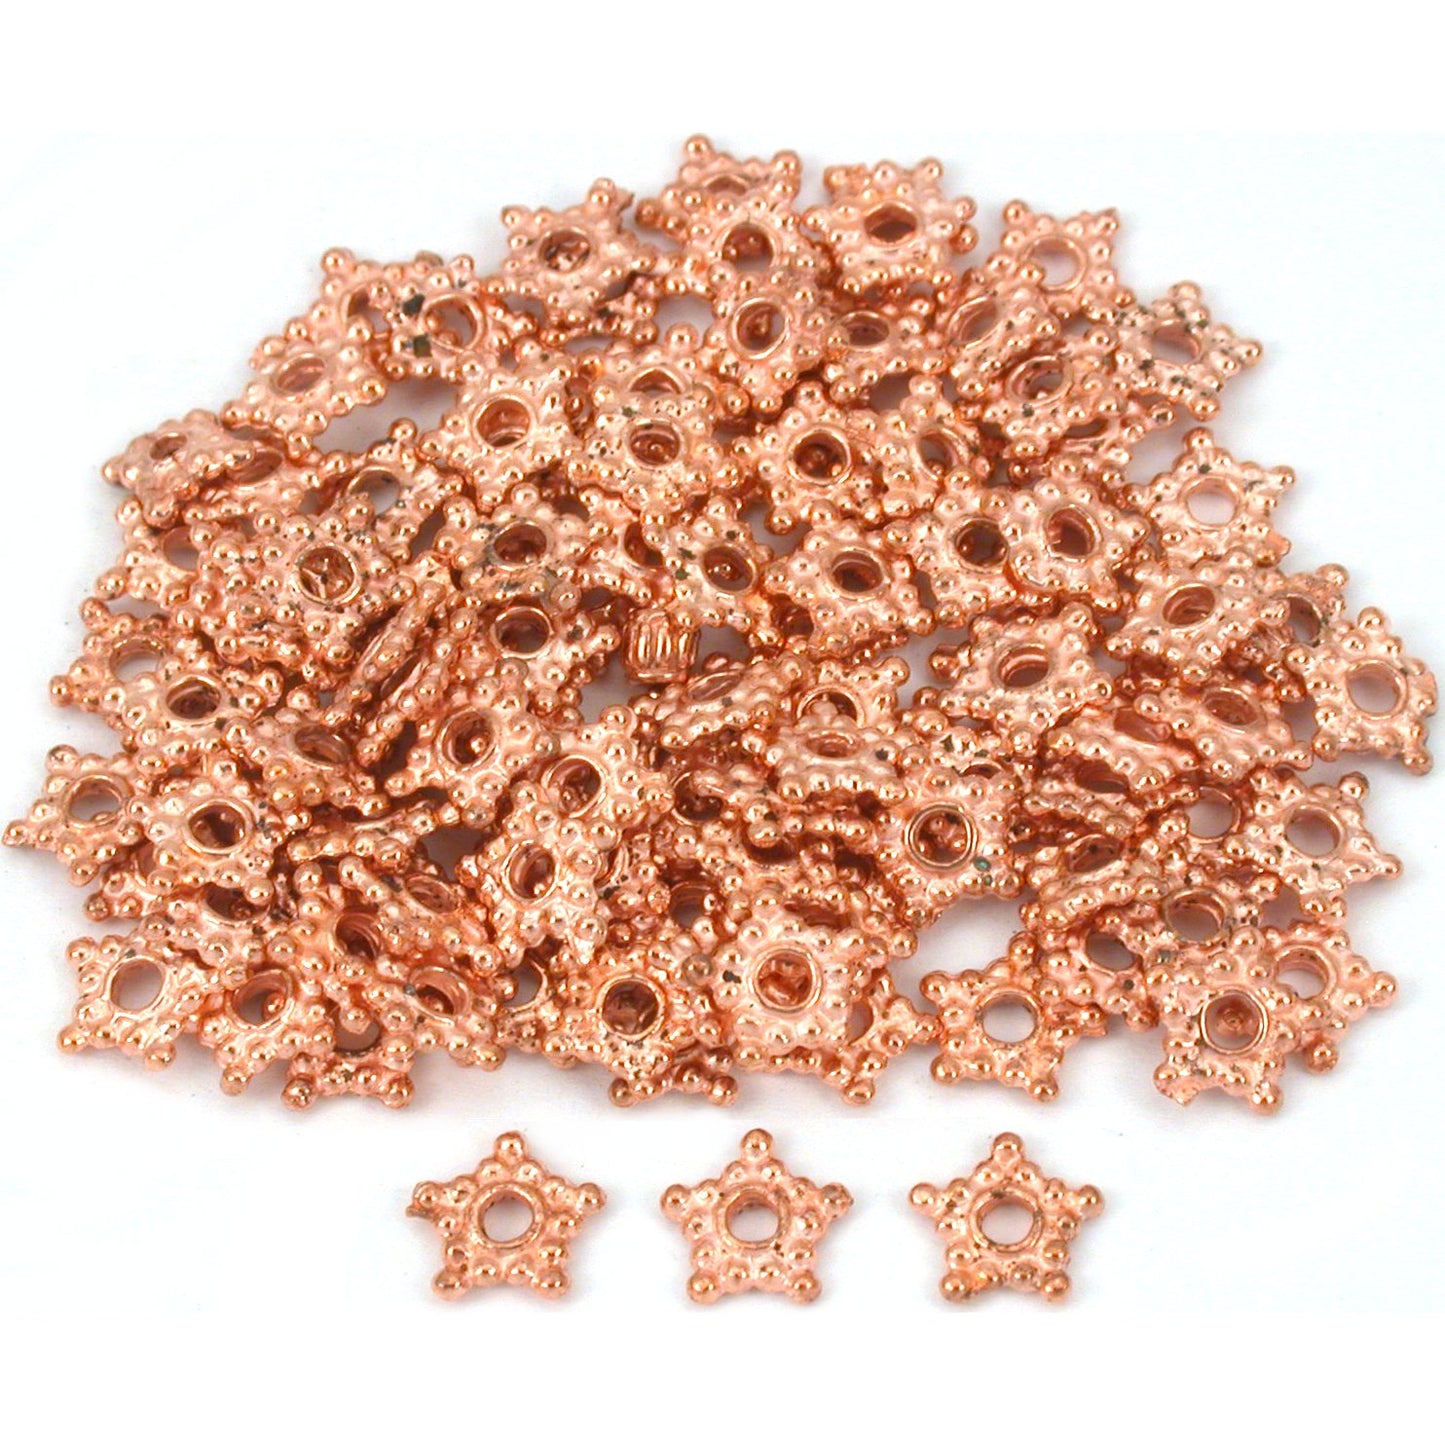 Bali Spacer Star Copper Plated Beads 6.5mm 100Pcs Approx.